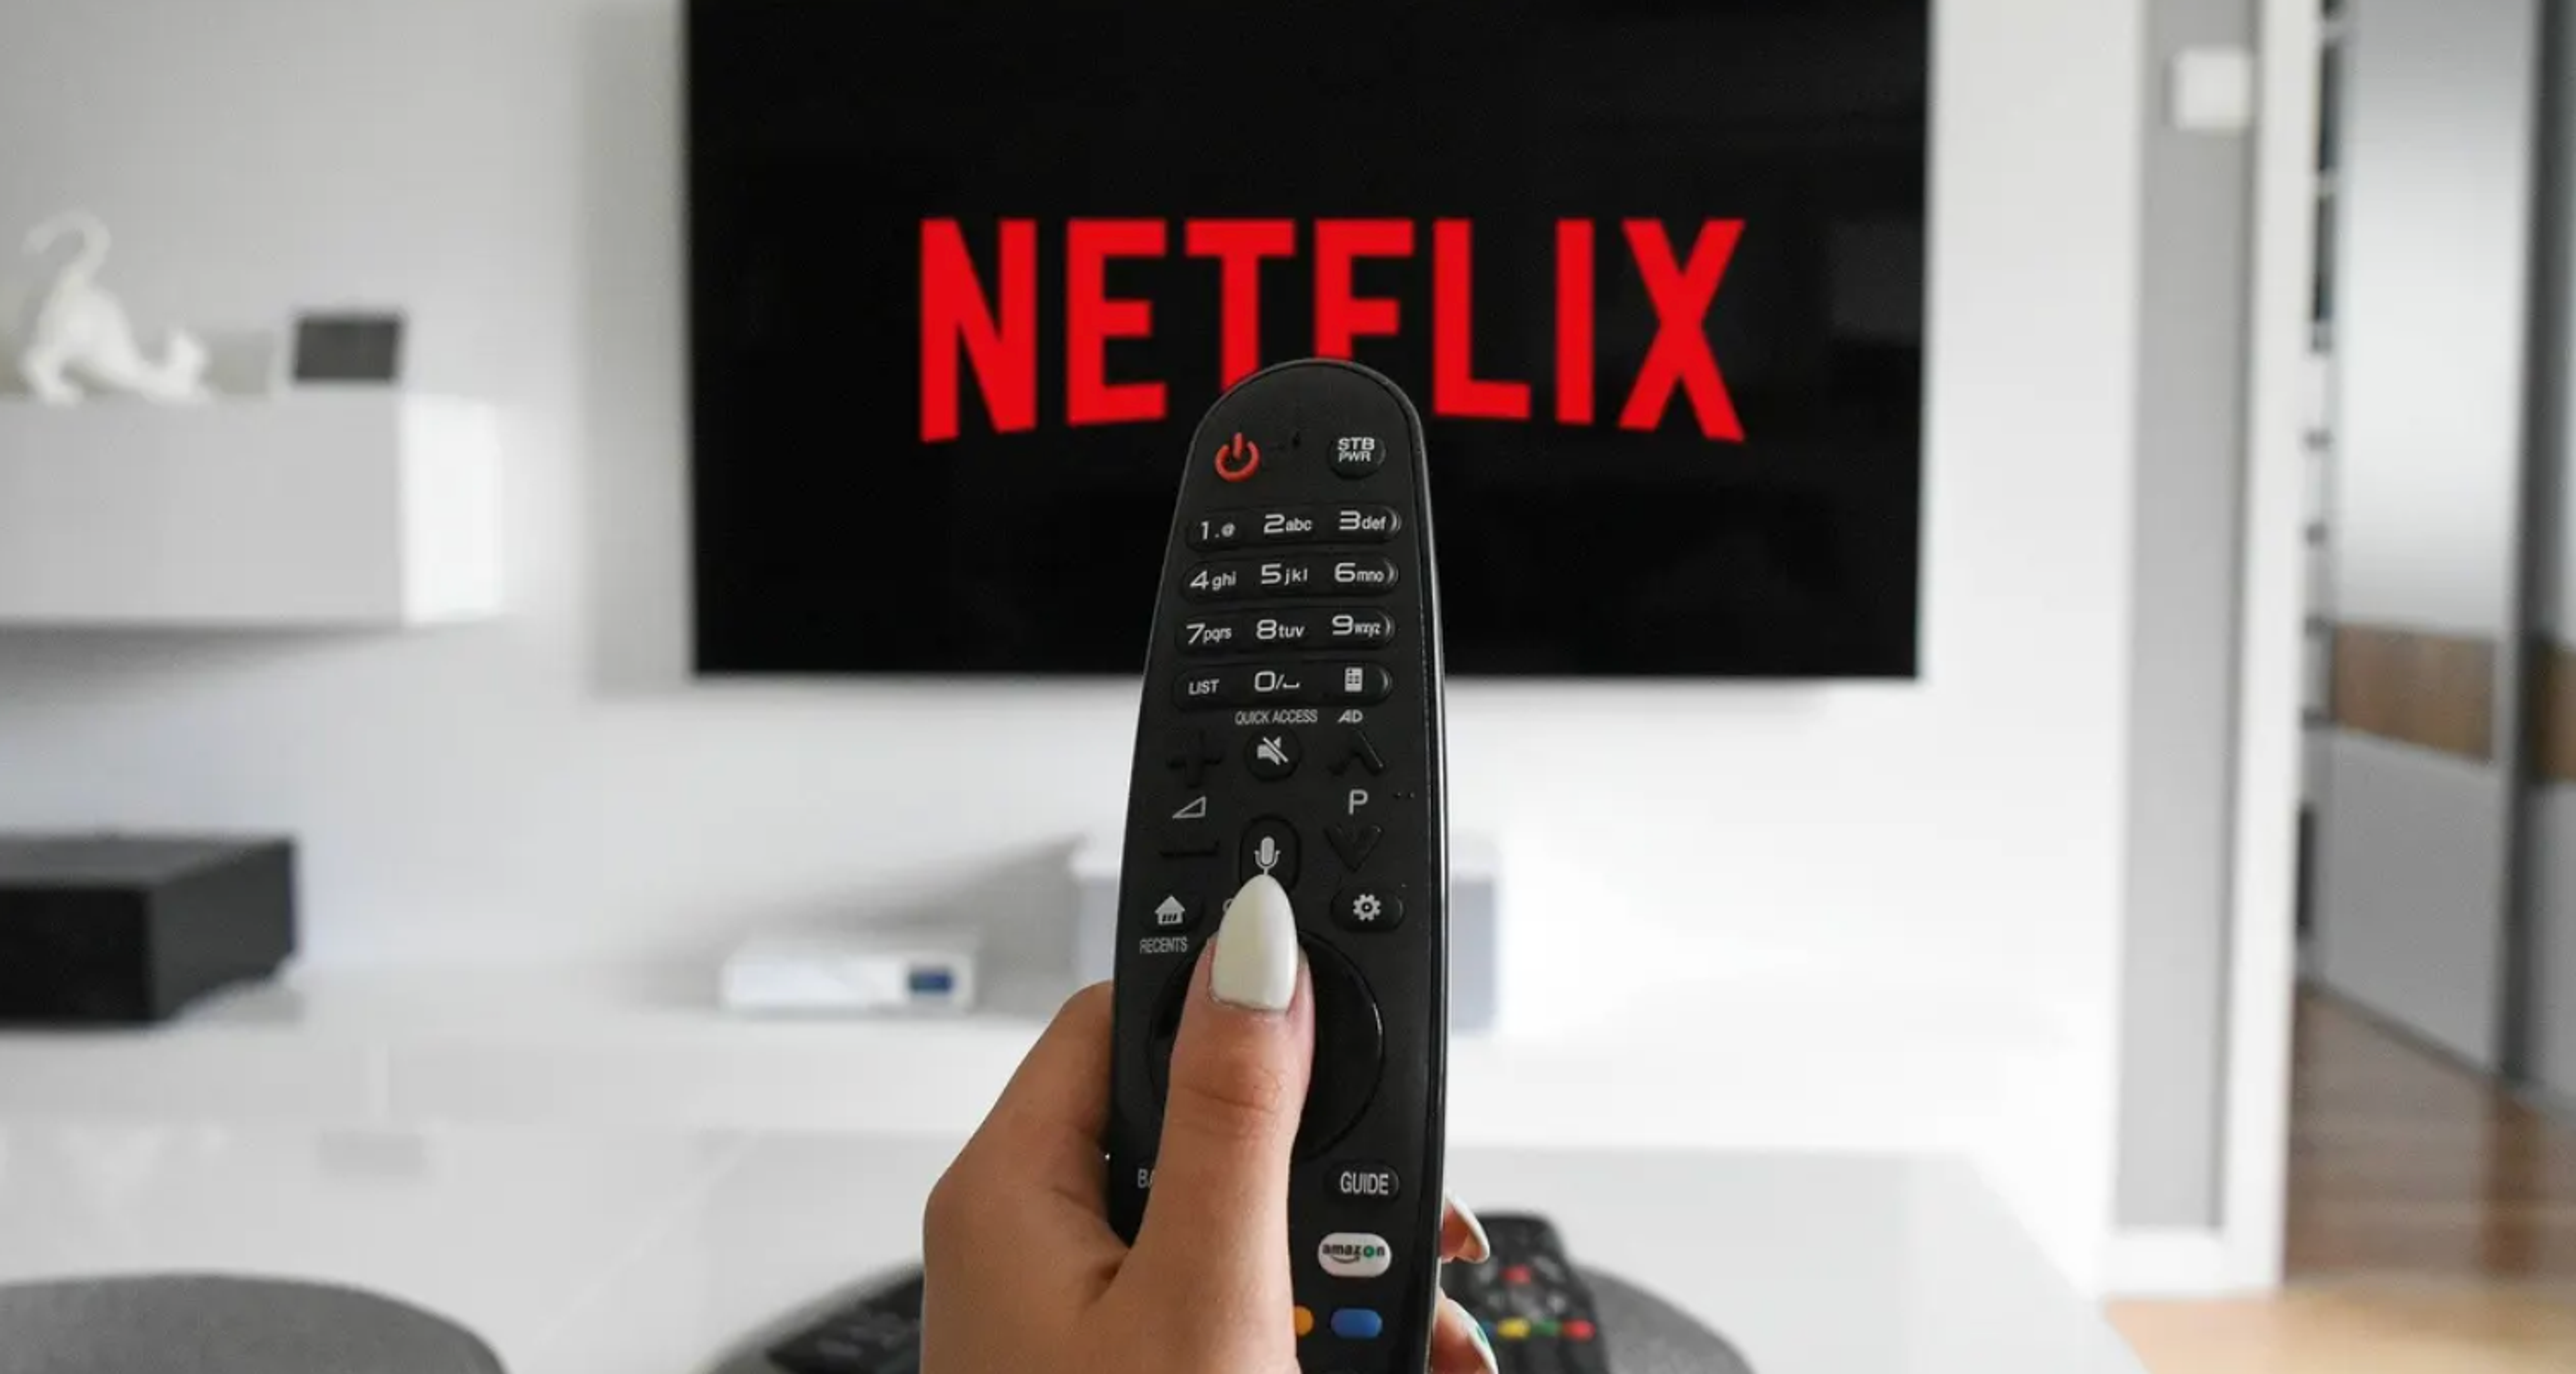 Netflix Working On Adding Livestreaming Content: Report